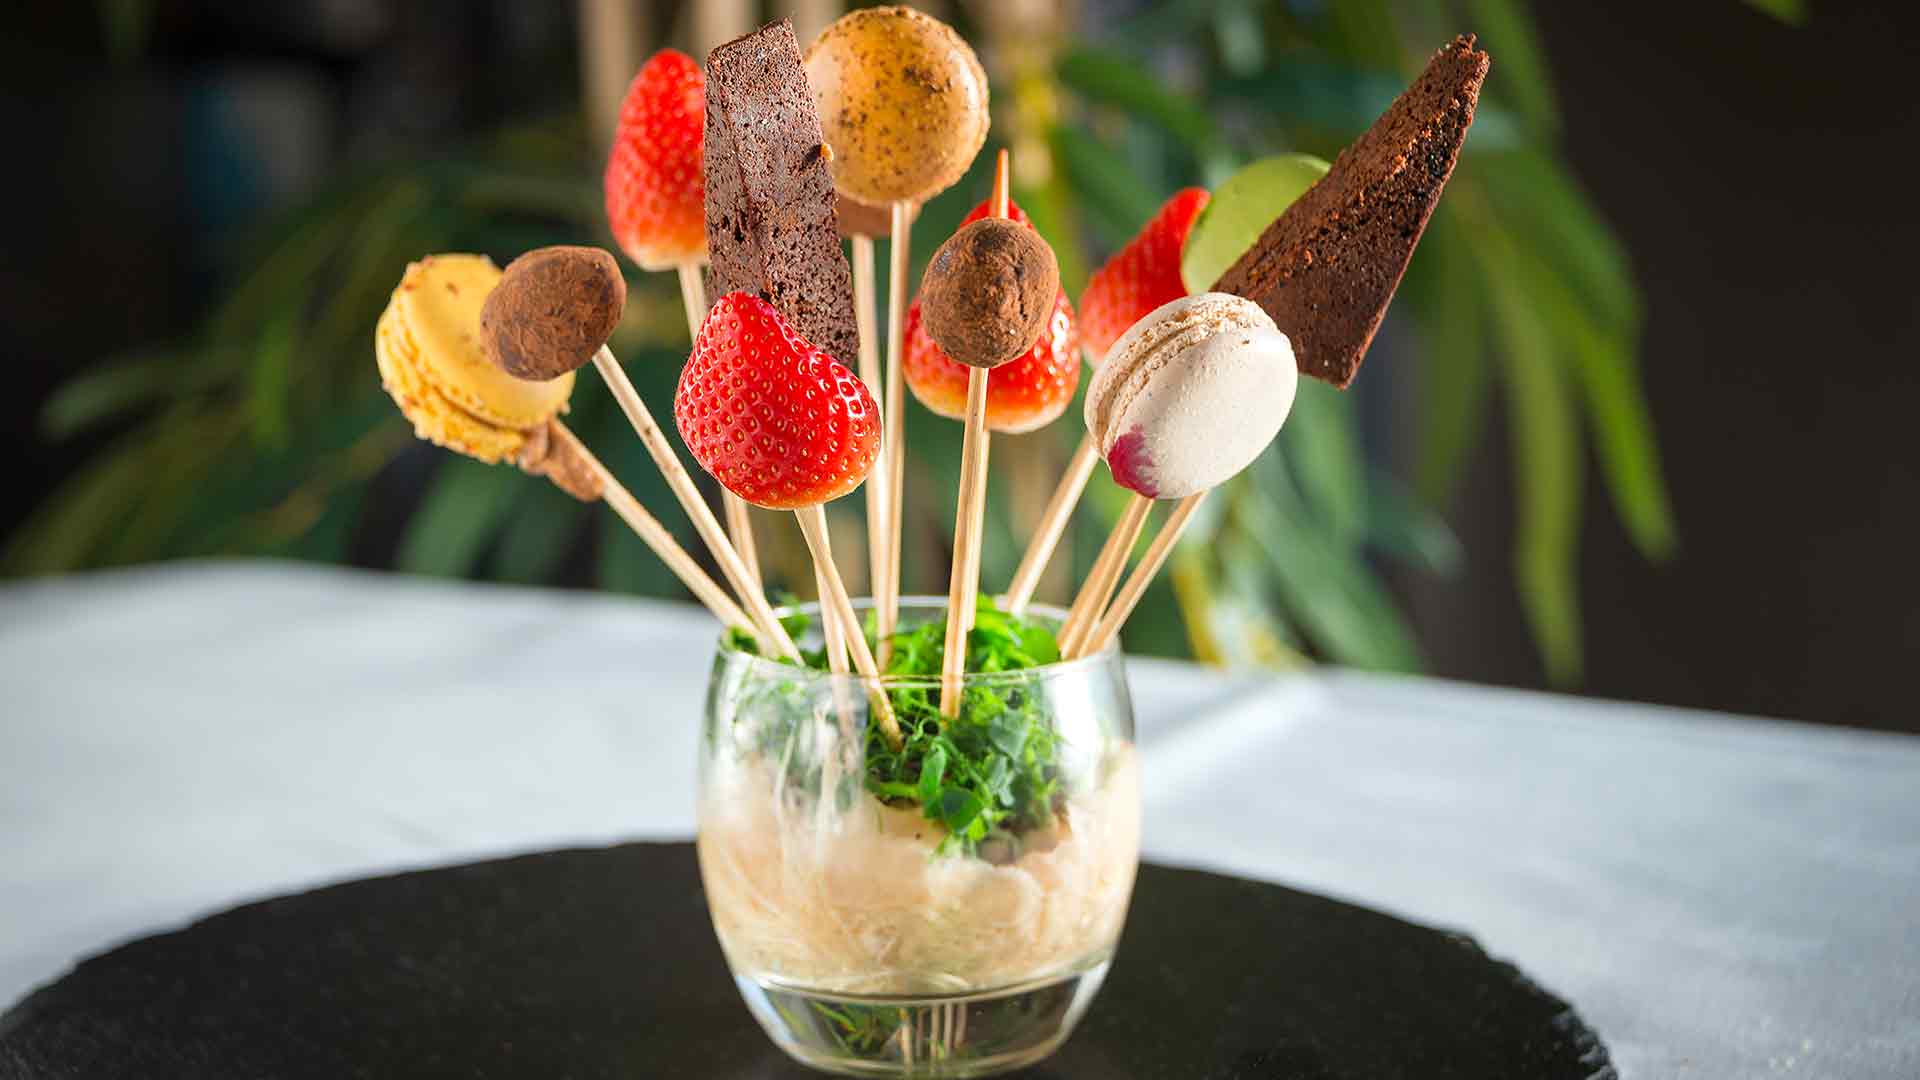 Assortment of sweet treats, macaroons and strawberries on sticks